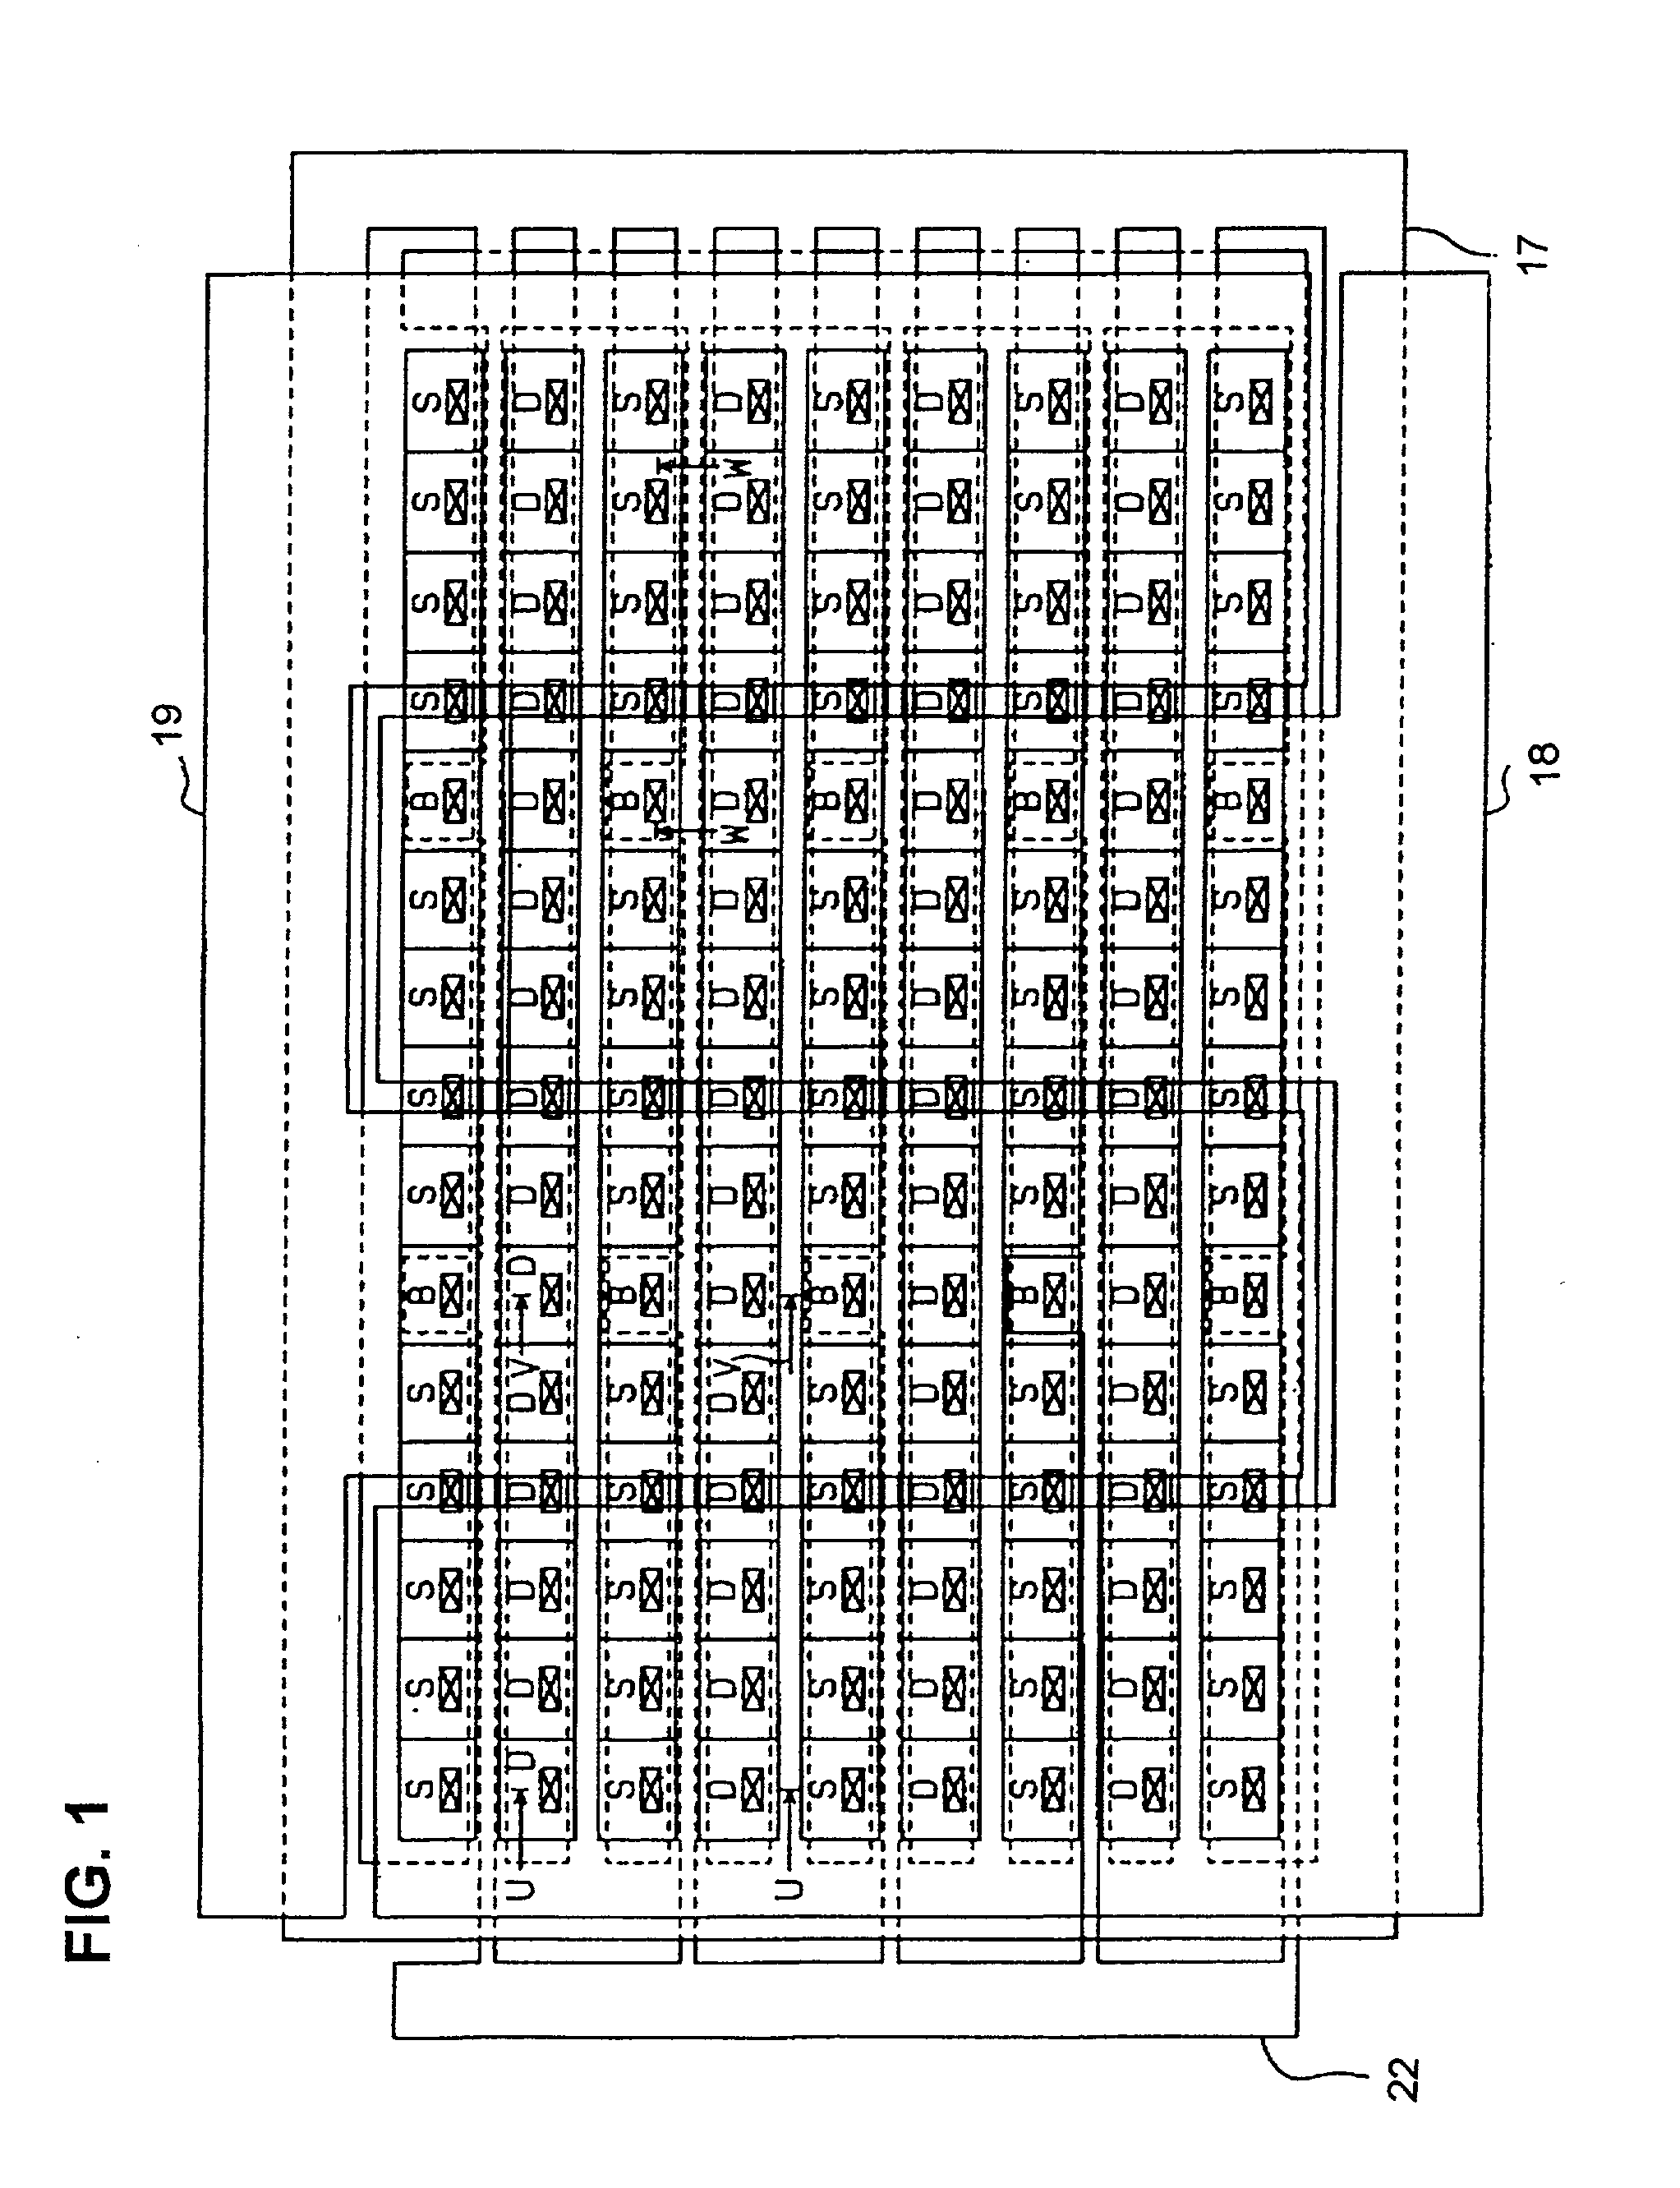 Power MOS transistor having capability for setting substrate potential independently of source potential